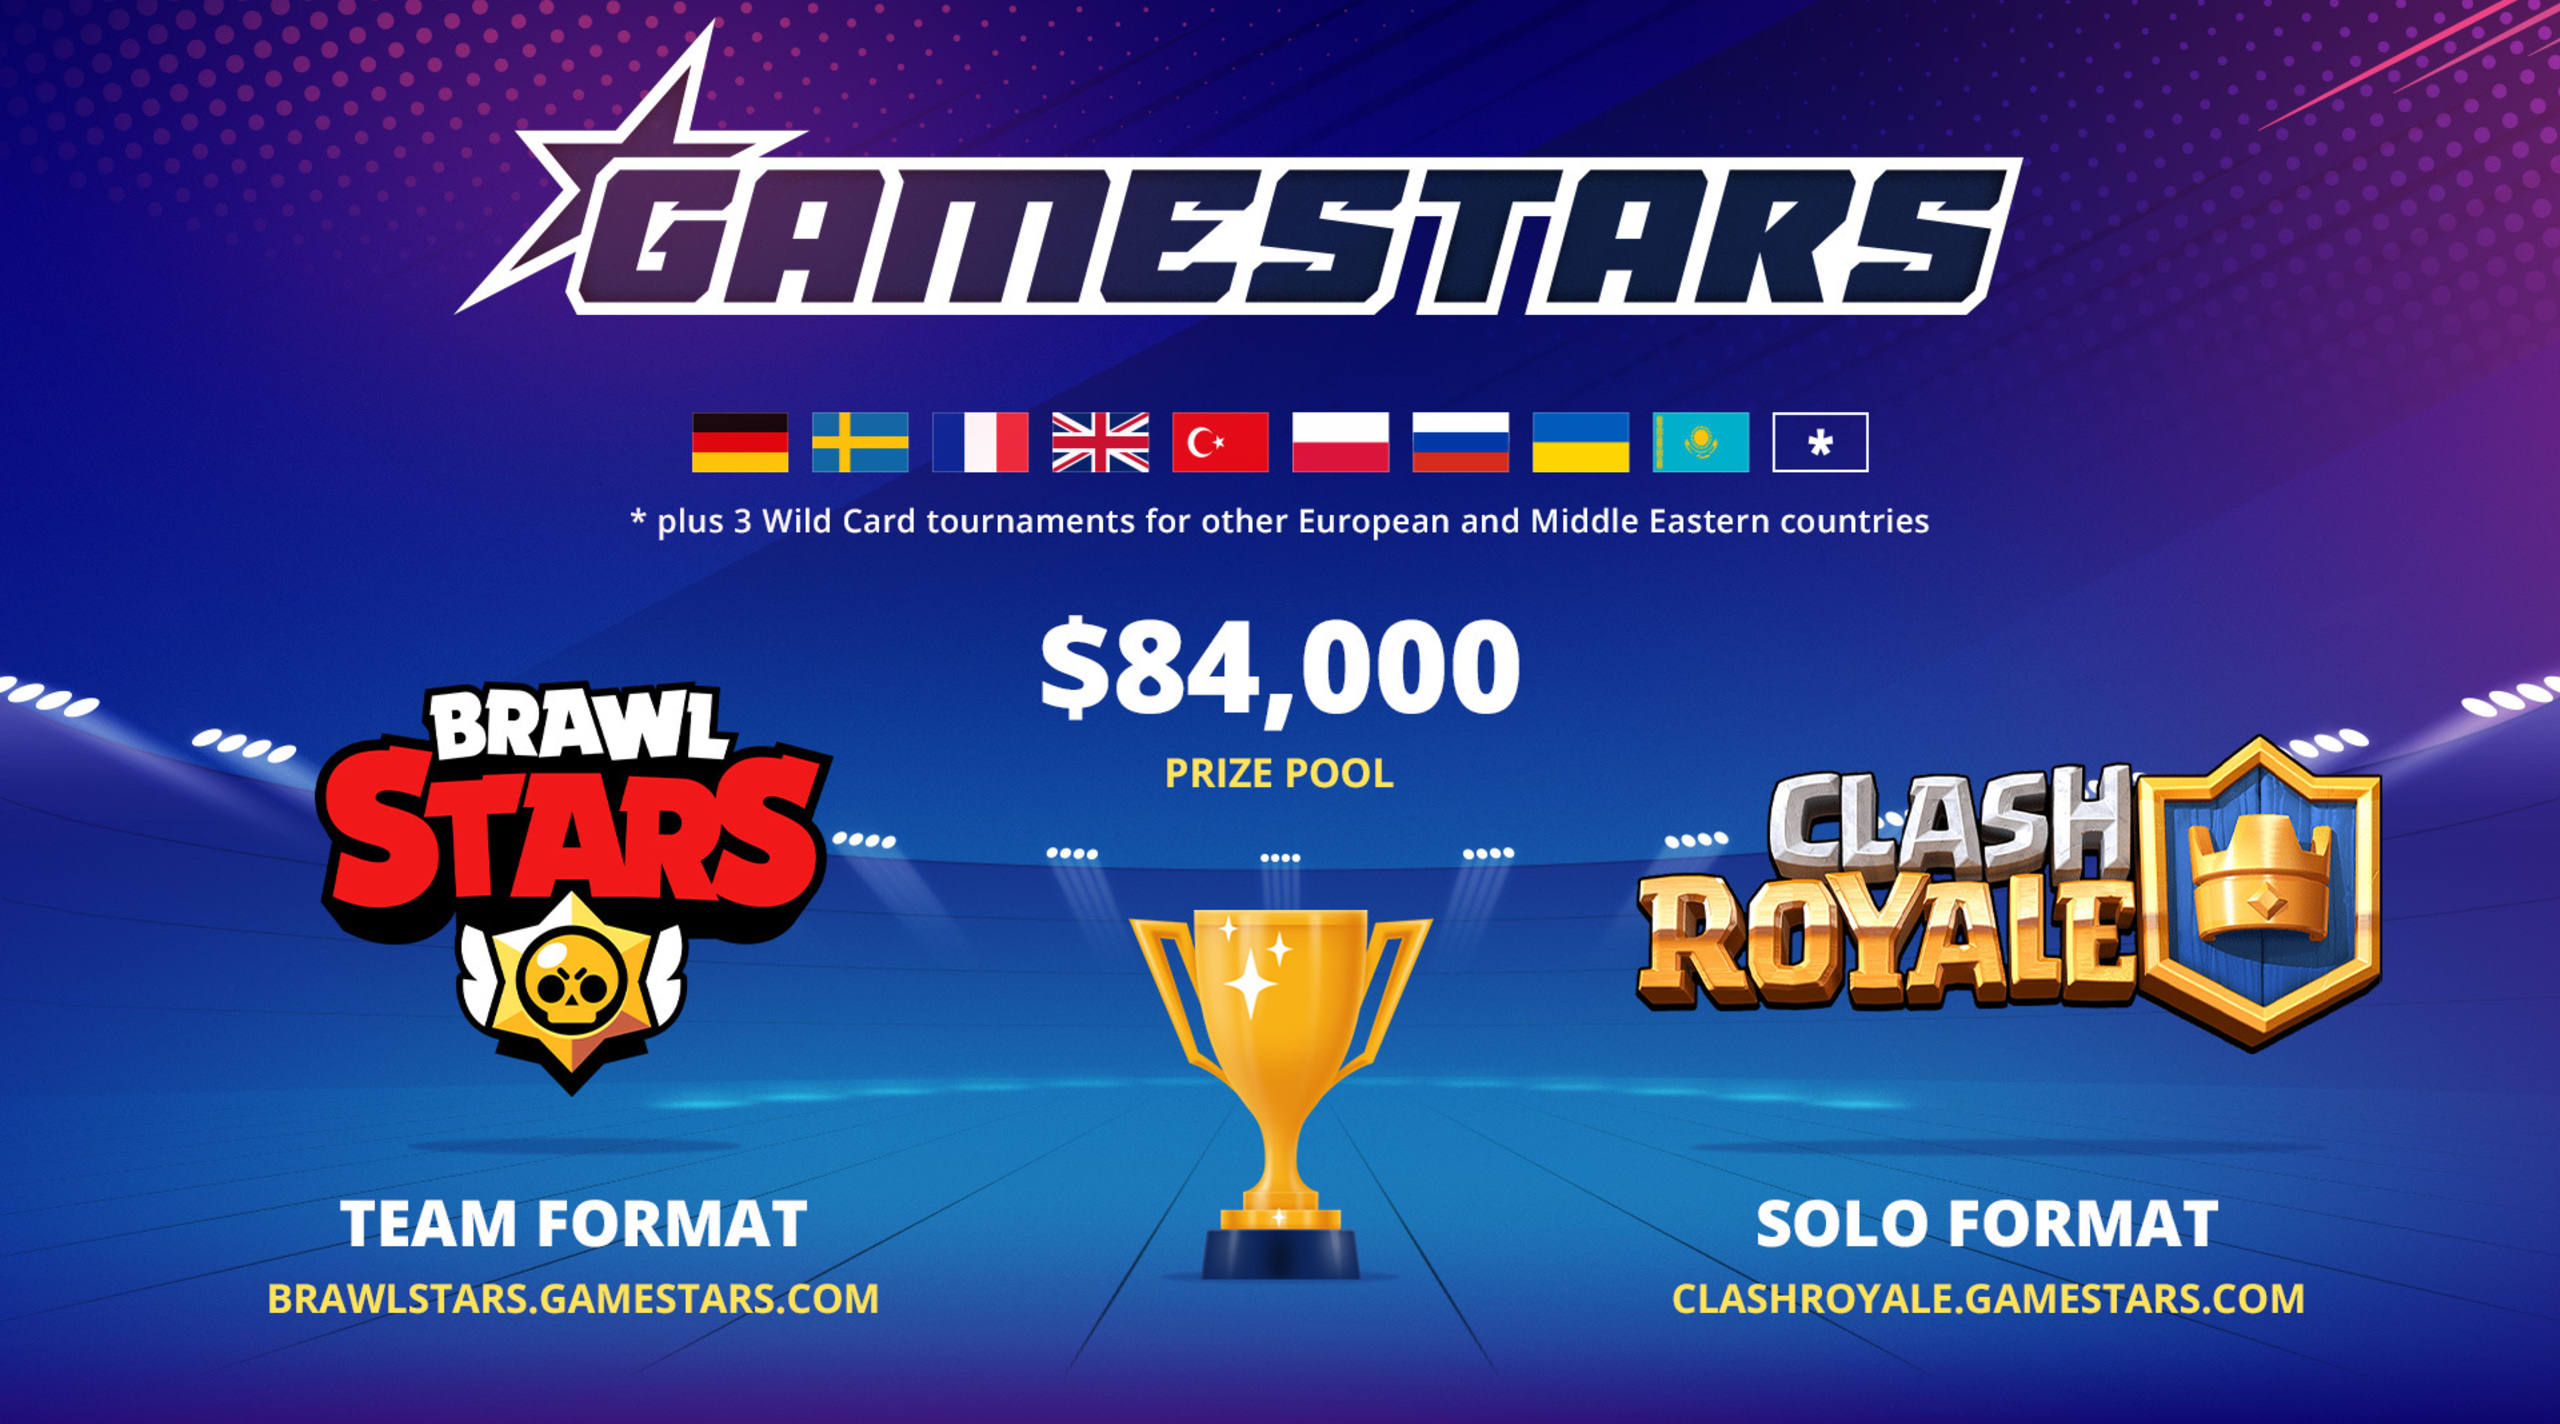 Starladder To Launch The First Season Of Gamestars League For The Brawl Stars And Clash Royale Players Starladder - brawl stars open brazil